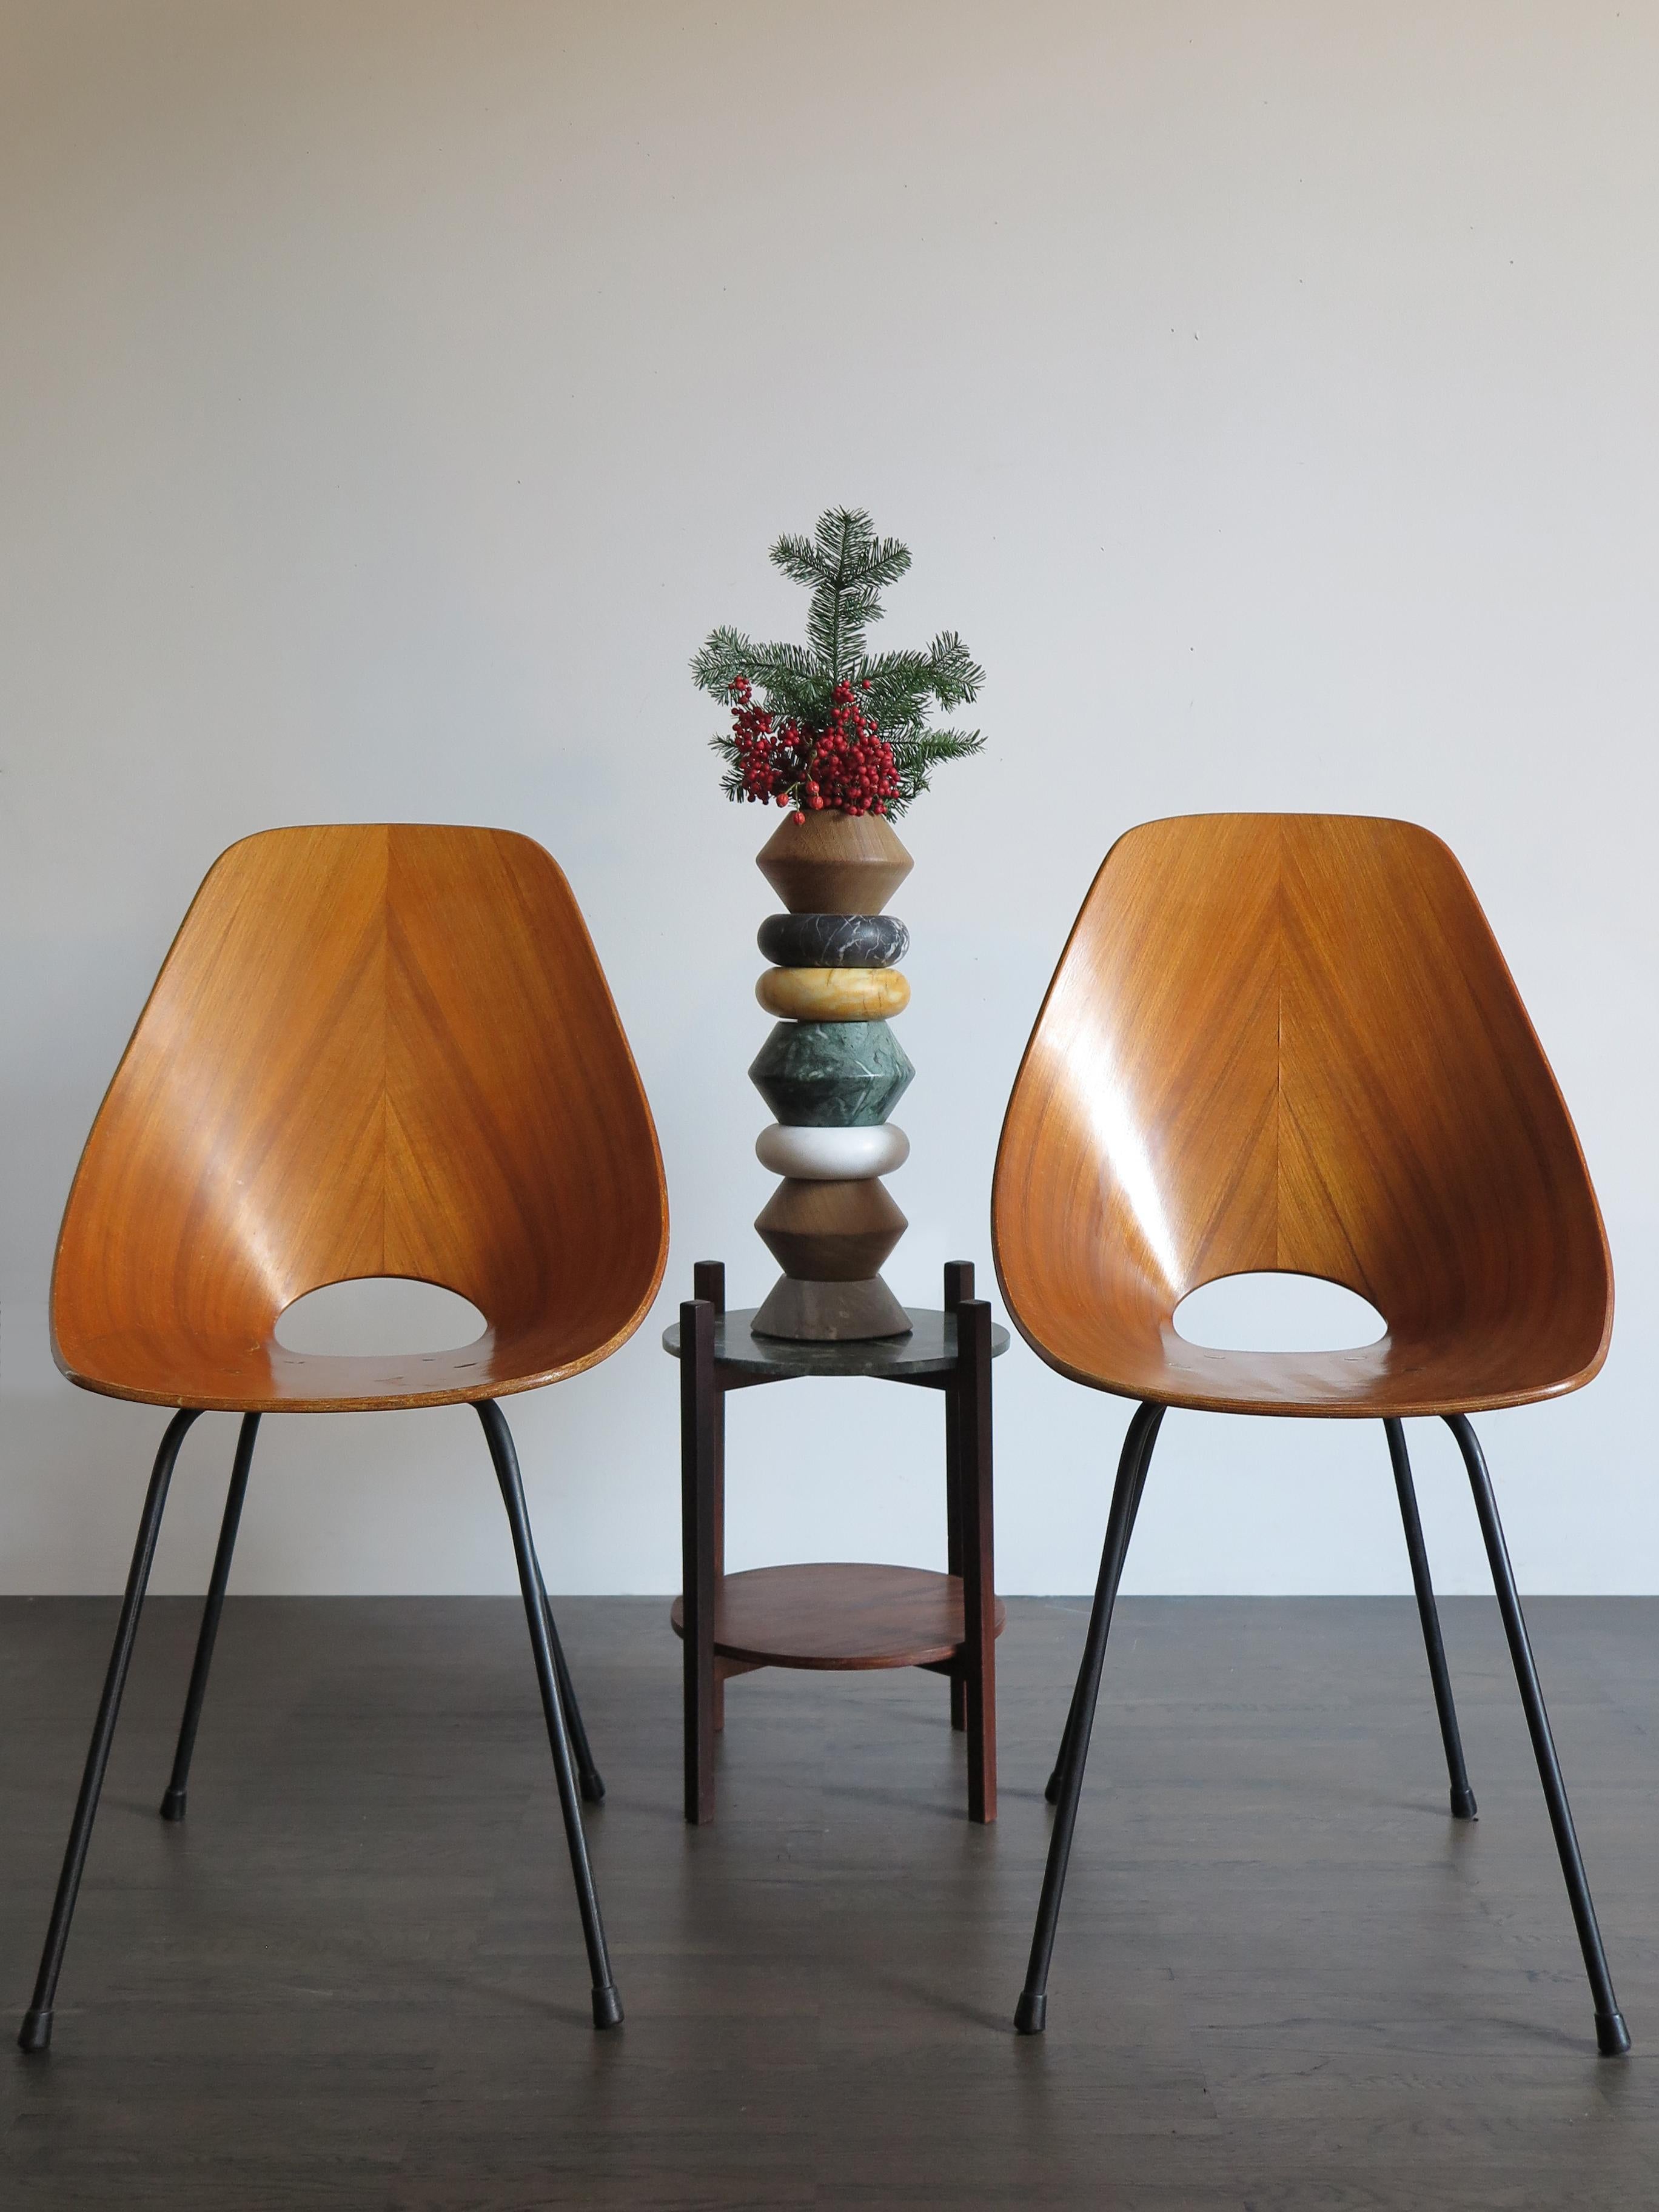 Painted Vittorio Nobili Italian Wood Dining Chairs Medea for Fratelli Tagliabue, 1950s